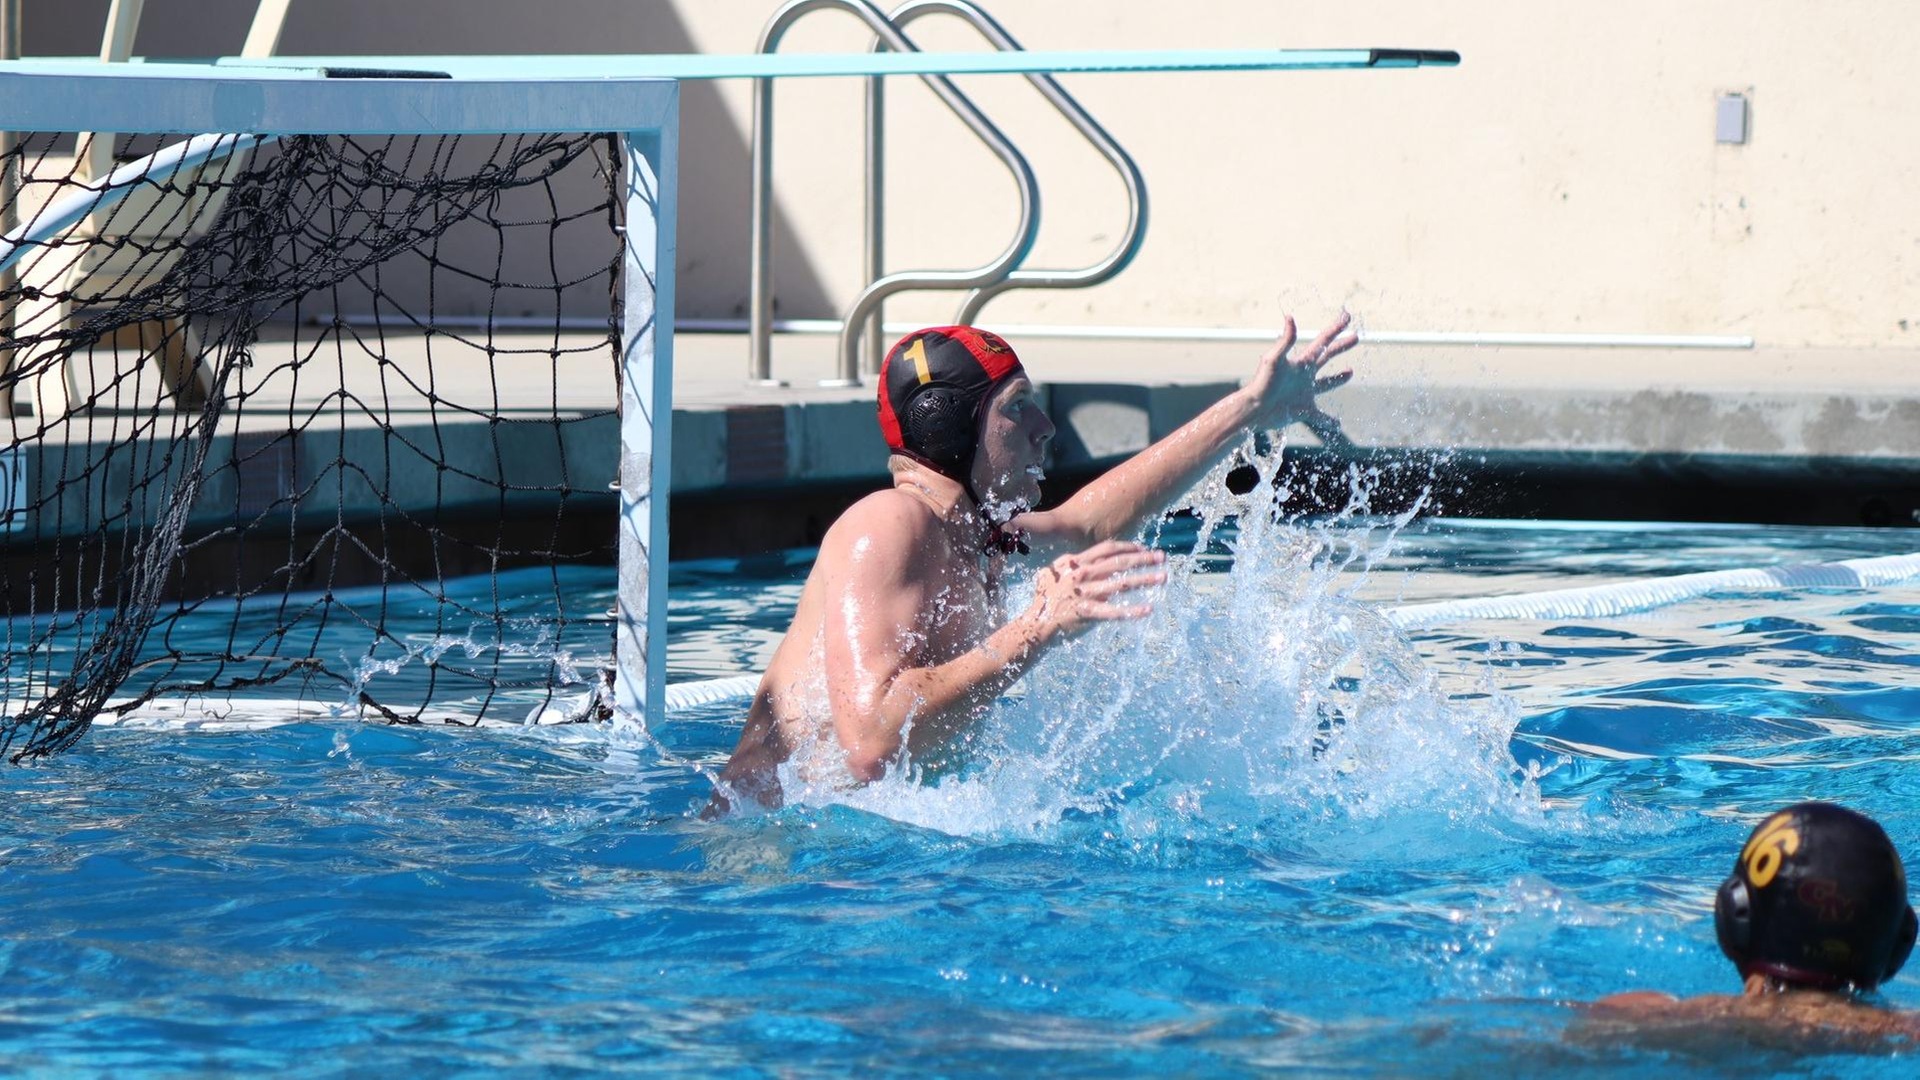 Aidan Nettekoven had 13 saves (photo by Caelyn Smith)